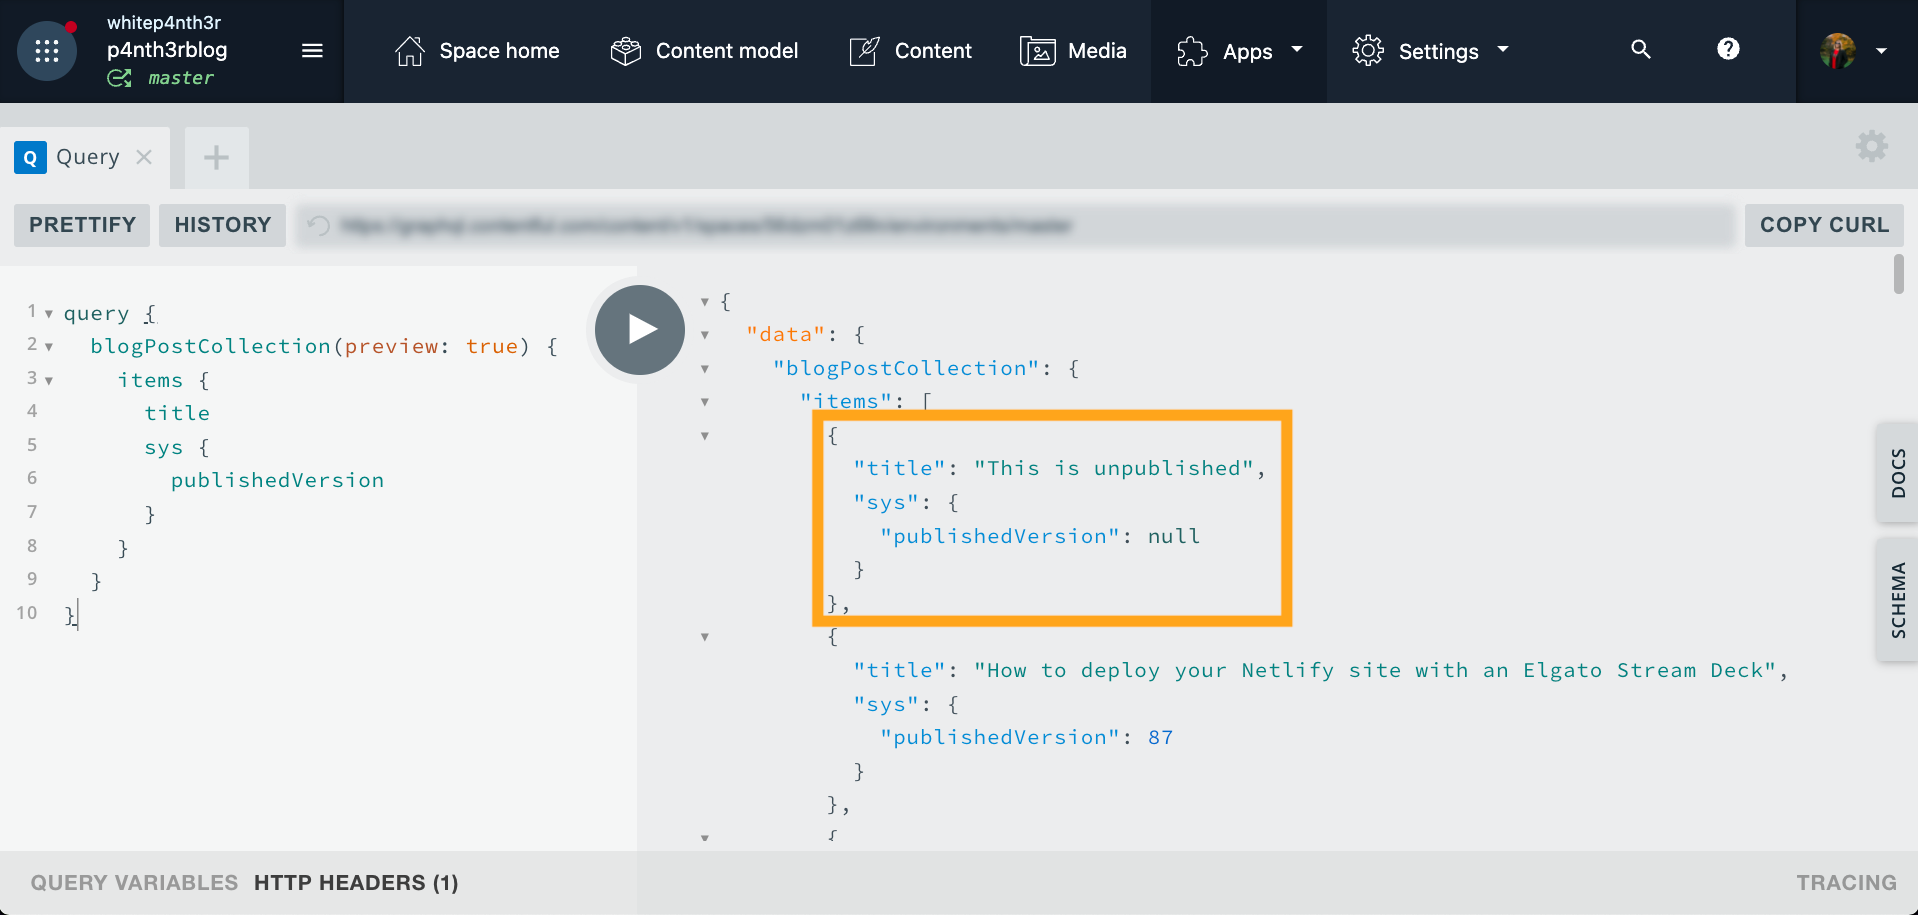 A screenshot from the Contentful GraphQL Playground app, showing a GraphQL response with an item that returns sys dot published version as null to confirm it is unpublished and we are receiving draft content using preview: true.